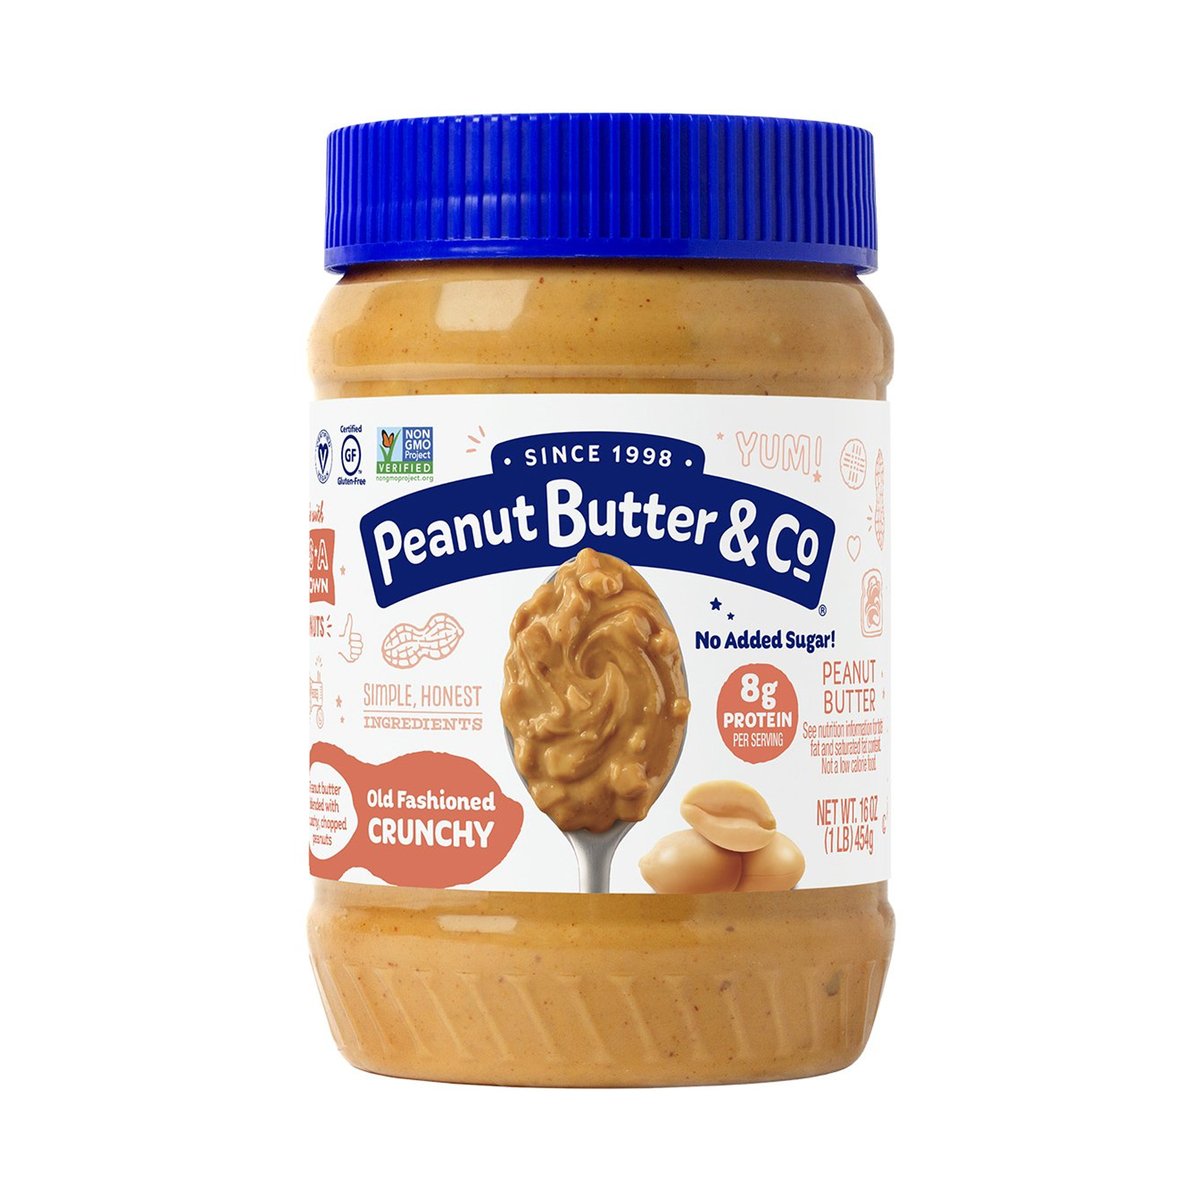 Peanut Butter & Co Old Fashioned Crunchy 454g